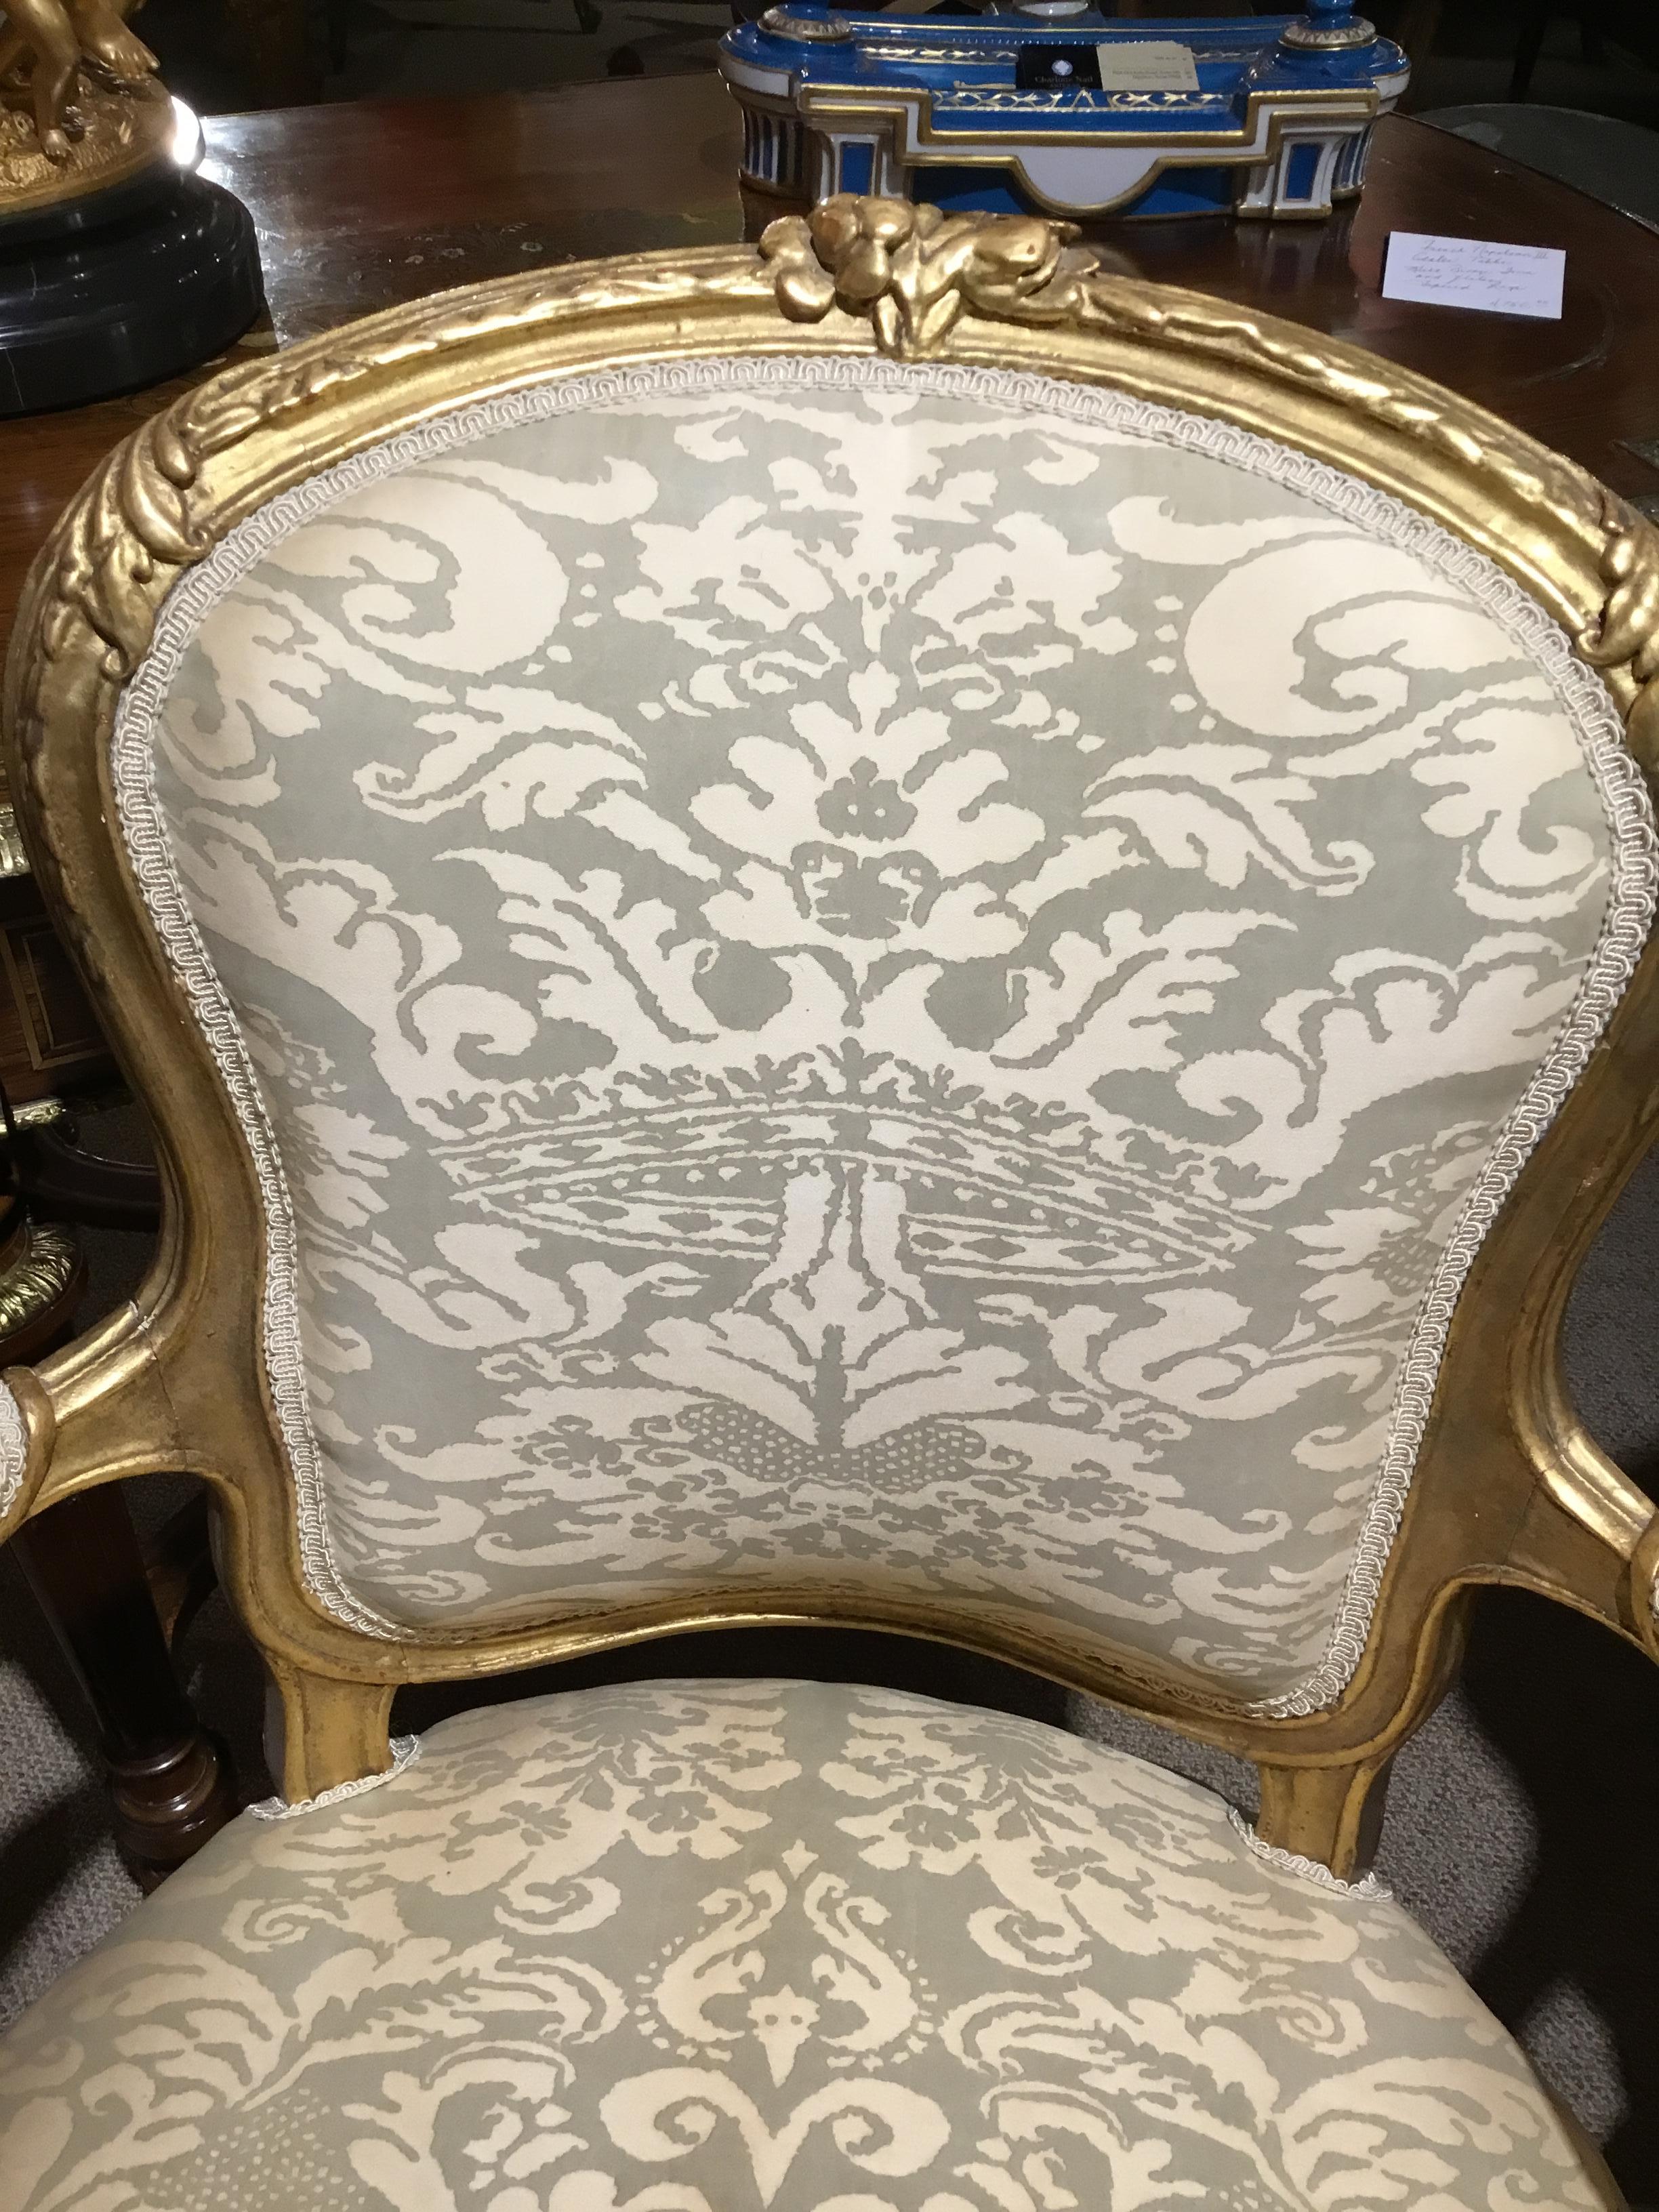 A pair of Louis XV style chairs, 20th century. Upholstered in a cream hue Fortuny fabric.
Carved giltwood with floral motif at center crest.